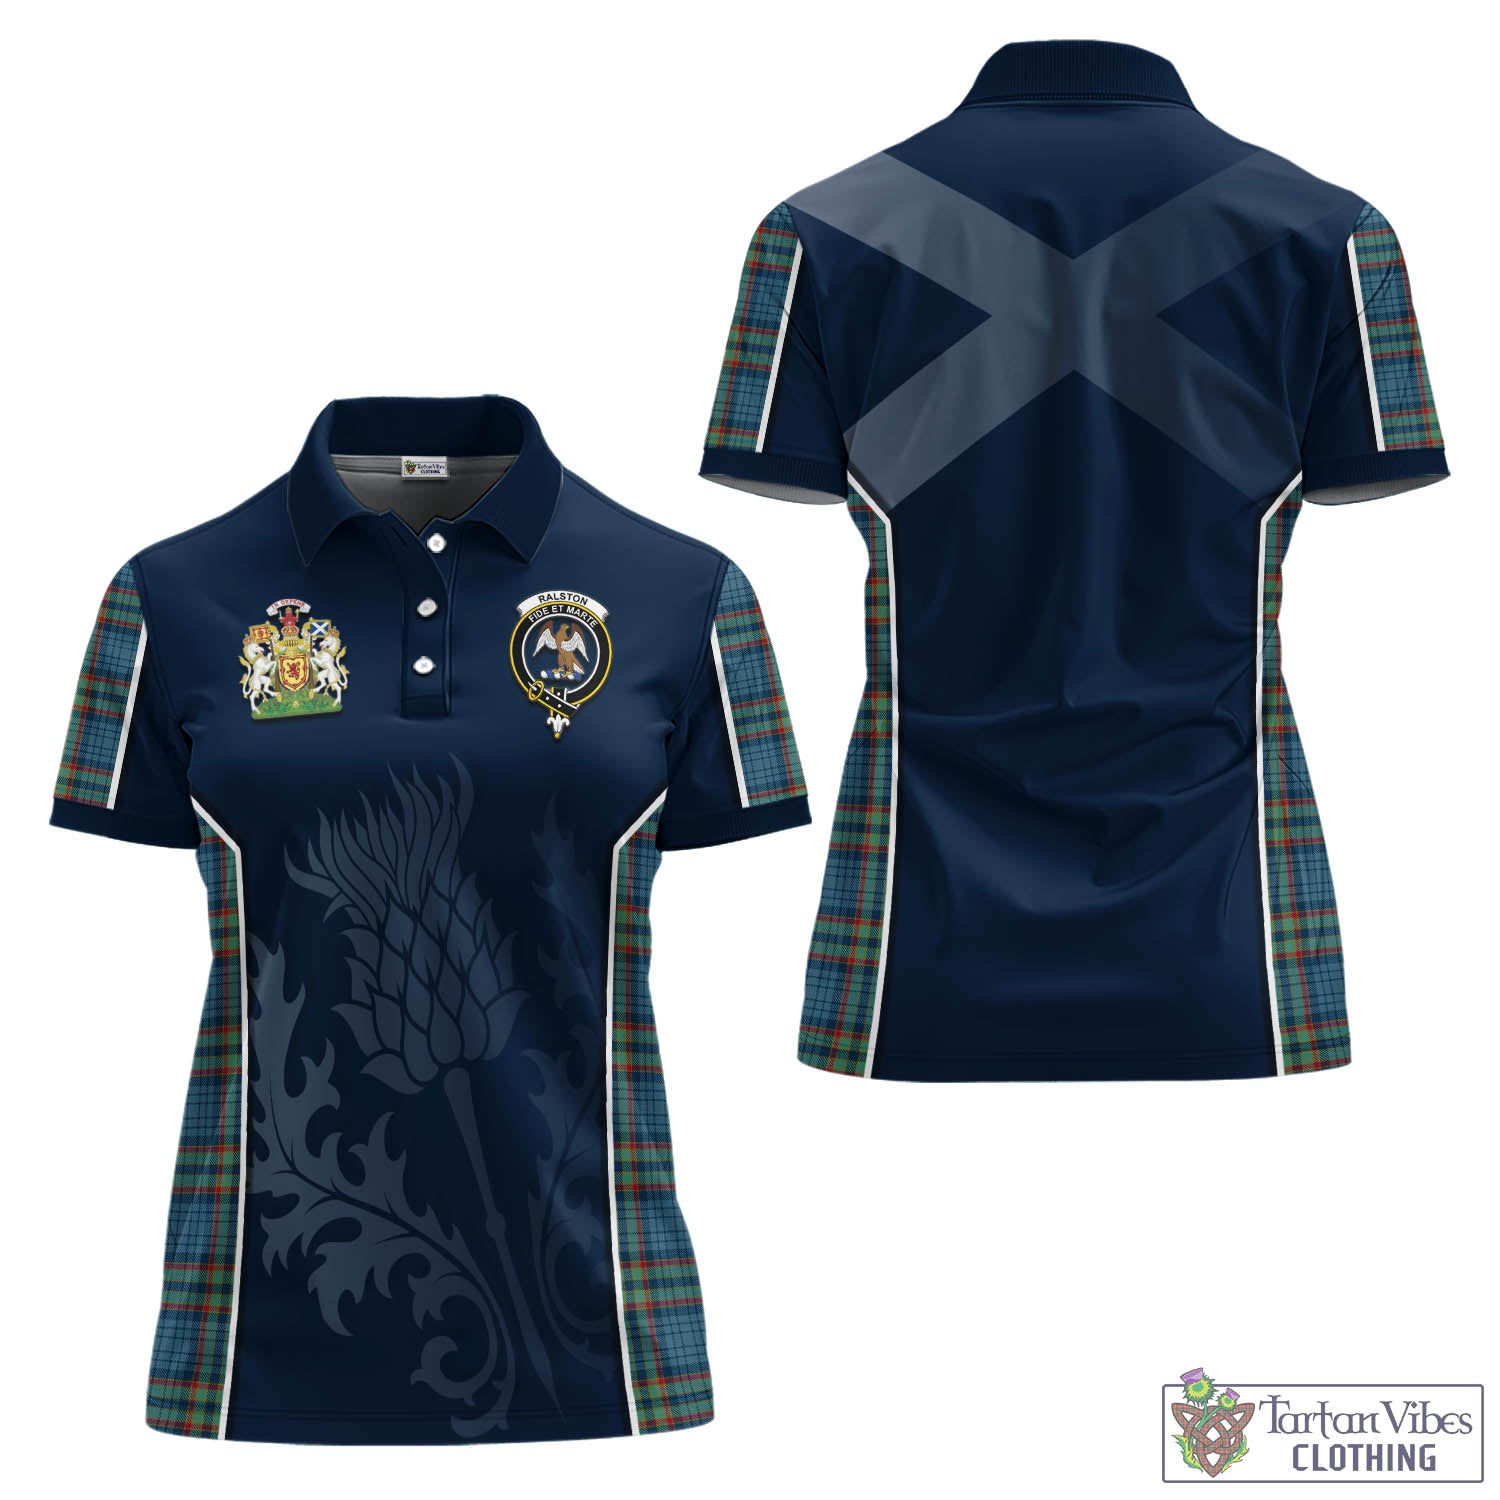 Tartan Vibes Clothing Ralston UK Tartan Women's Polo Shirt with Family Crest and Scottish Thistle Vibes Sport Style